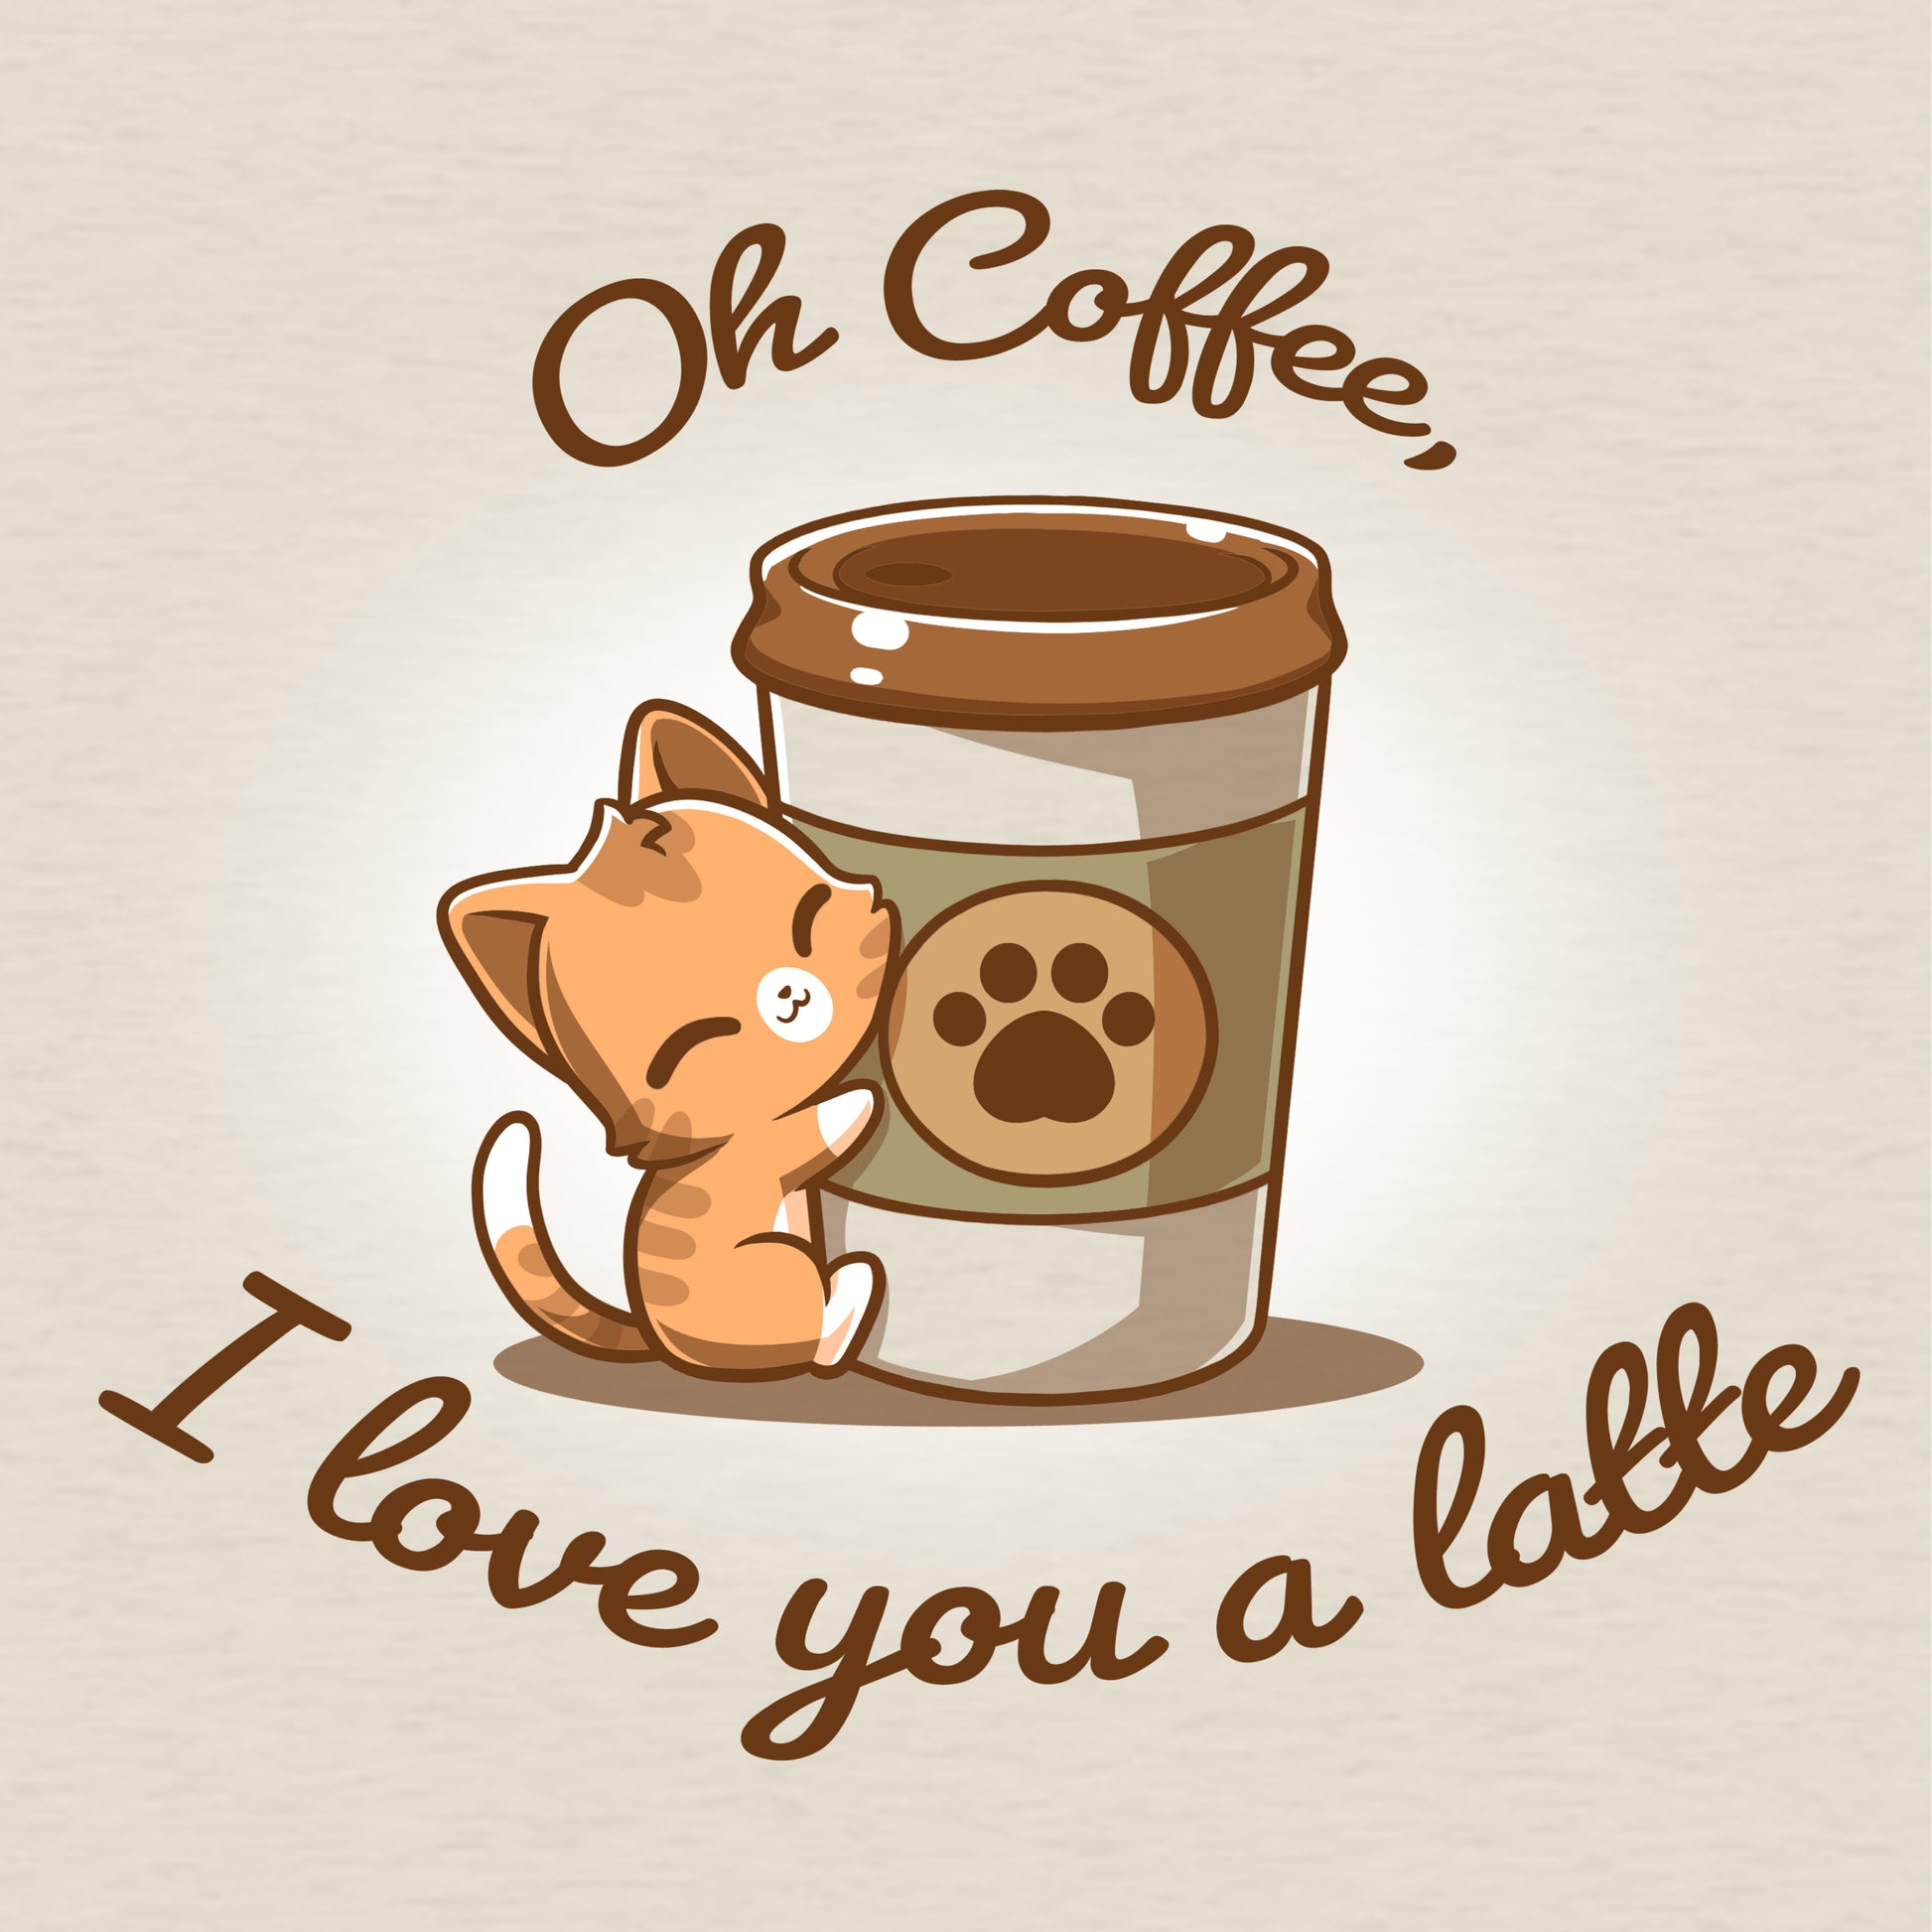 Oh Coffee, I Love You A Latte t-shirt by TeeTurtle.